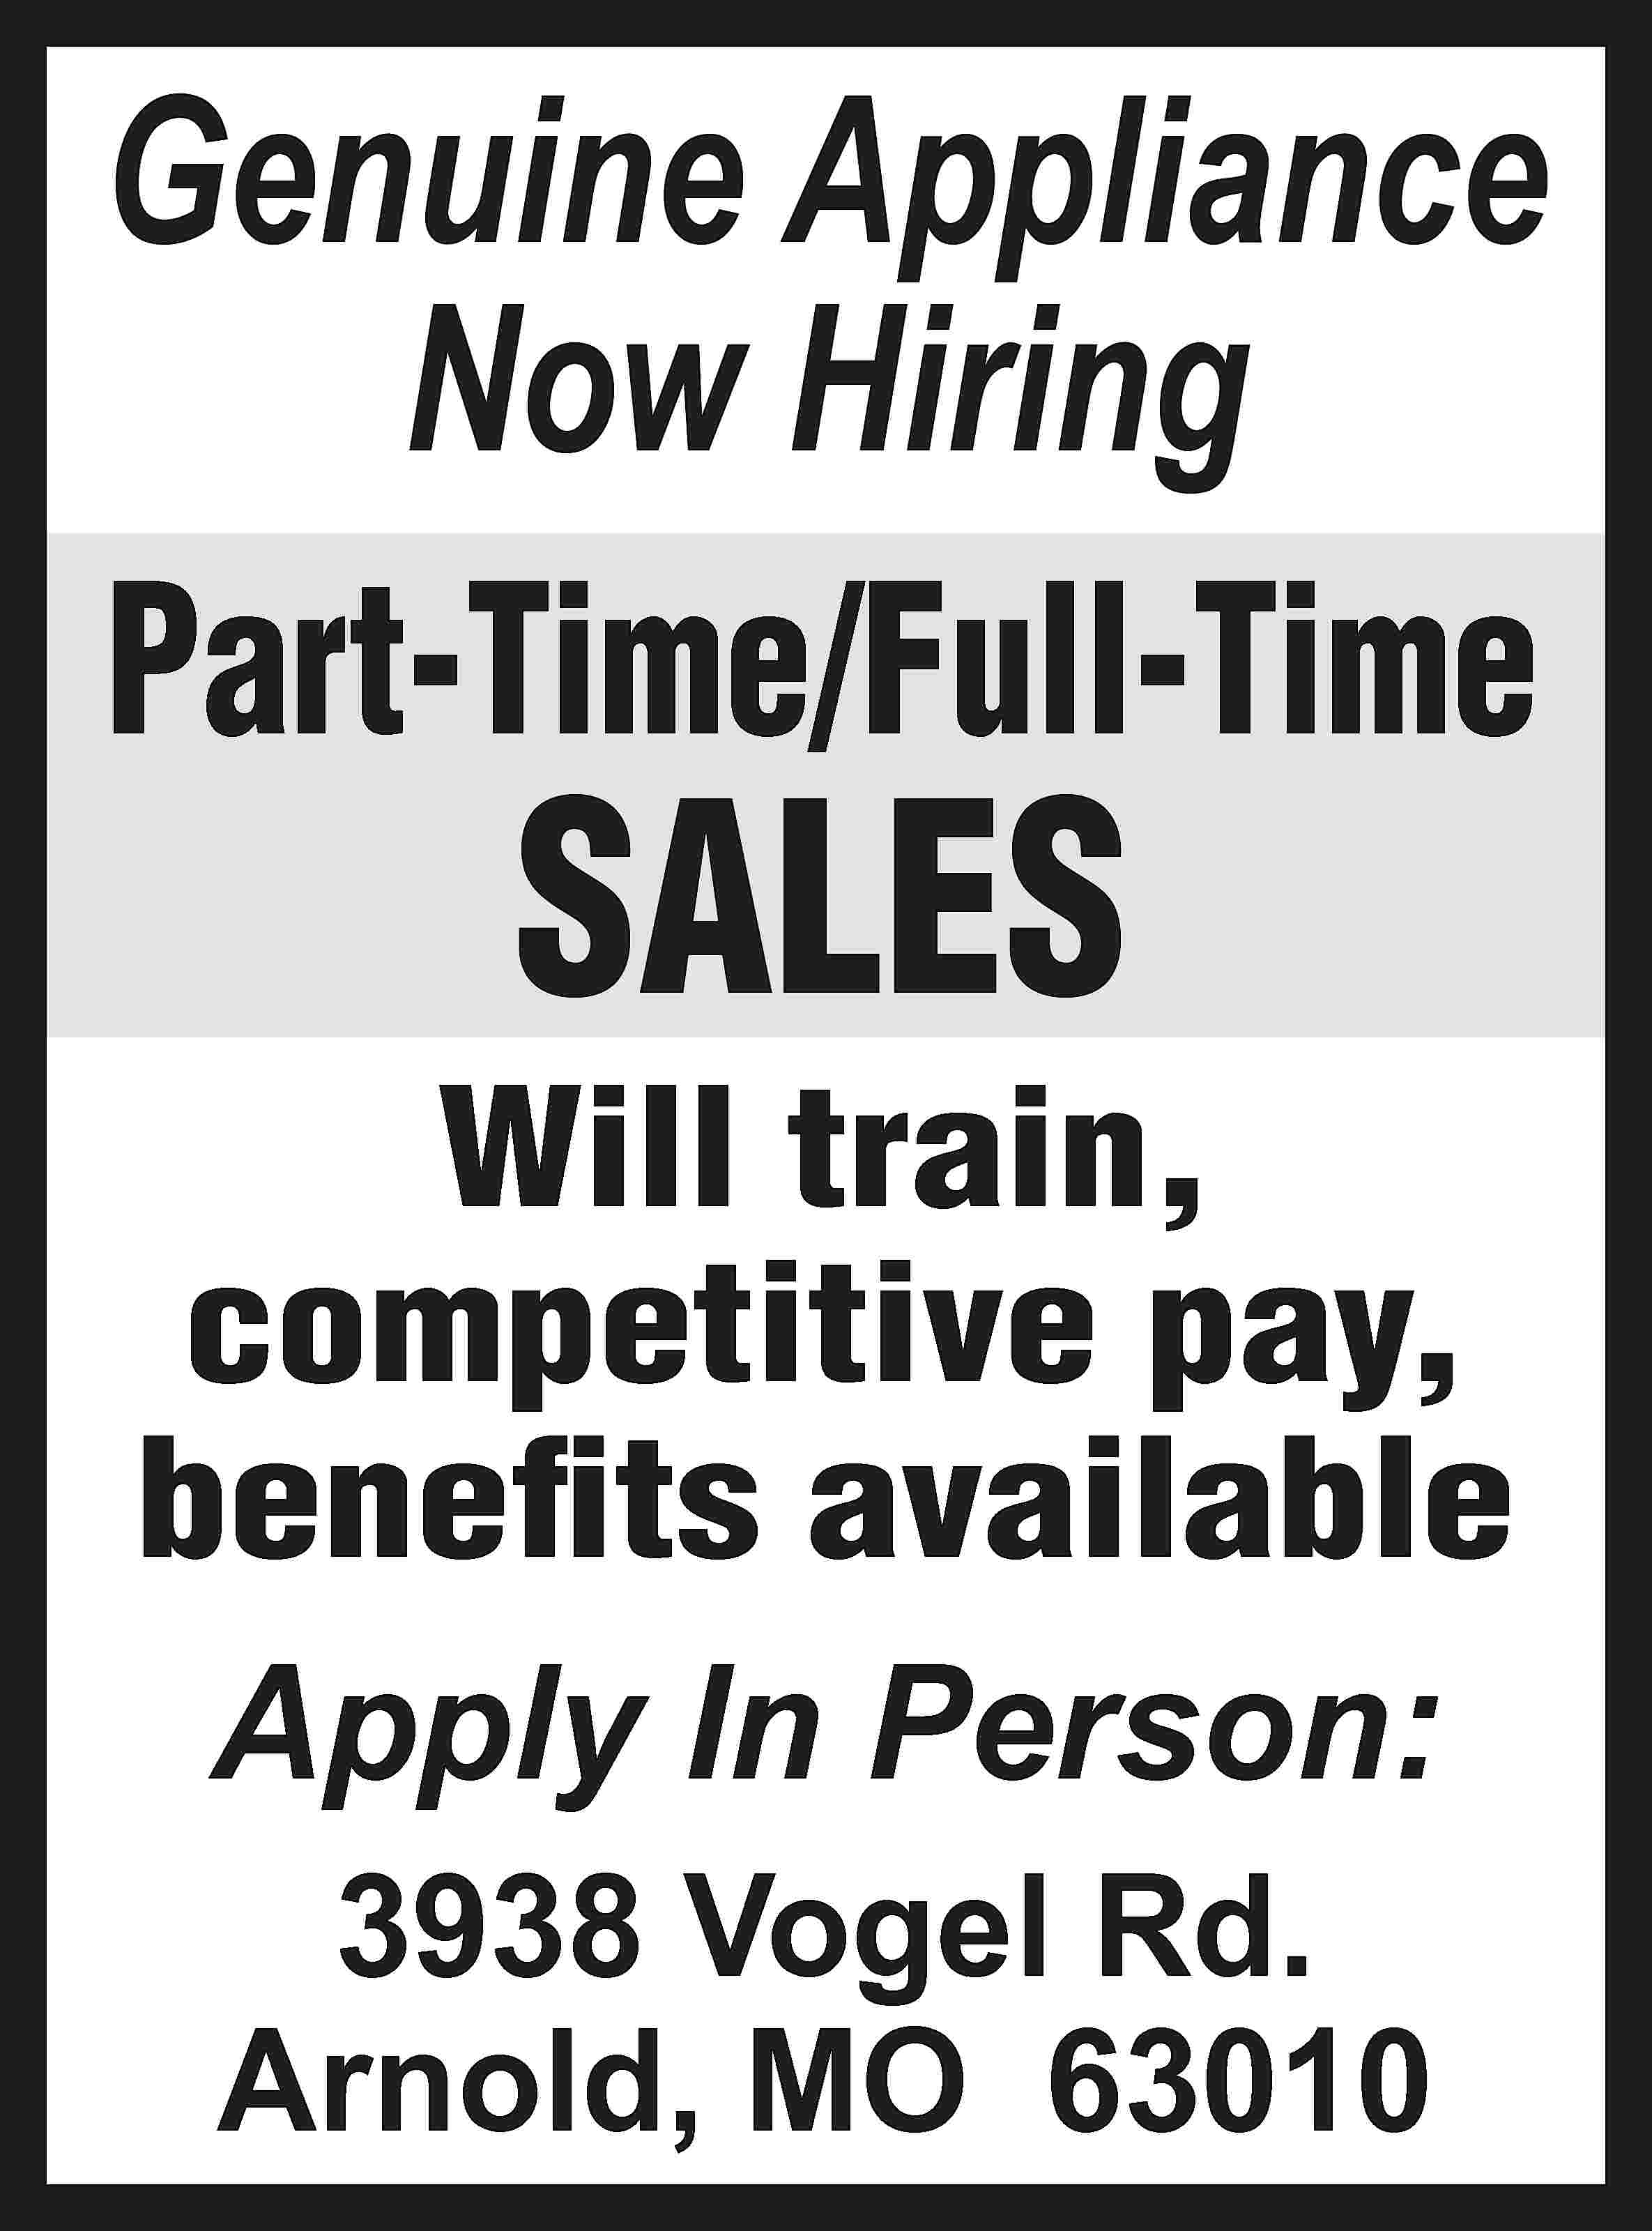 Genuine Appliance Now Hiring Part-Time/Full-Time  Genuine Appliance Now Hiring Part-Time/Full-Time SALES Will train, competitive pay, benefits available Apply In Person: 3938 Vogel Rd. Arnold, MO 63010